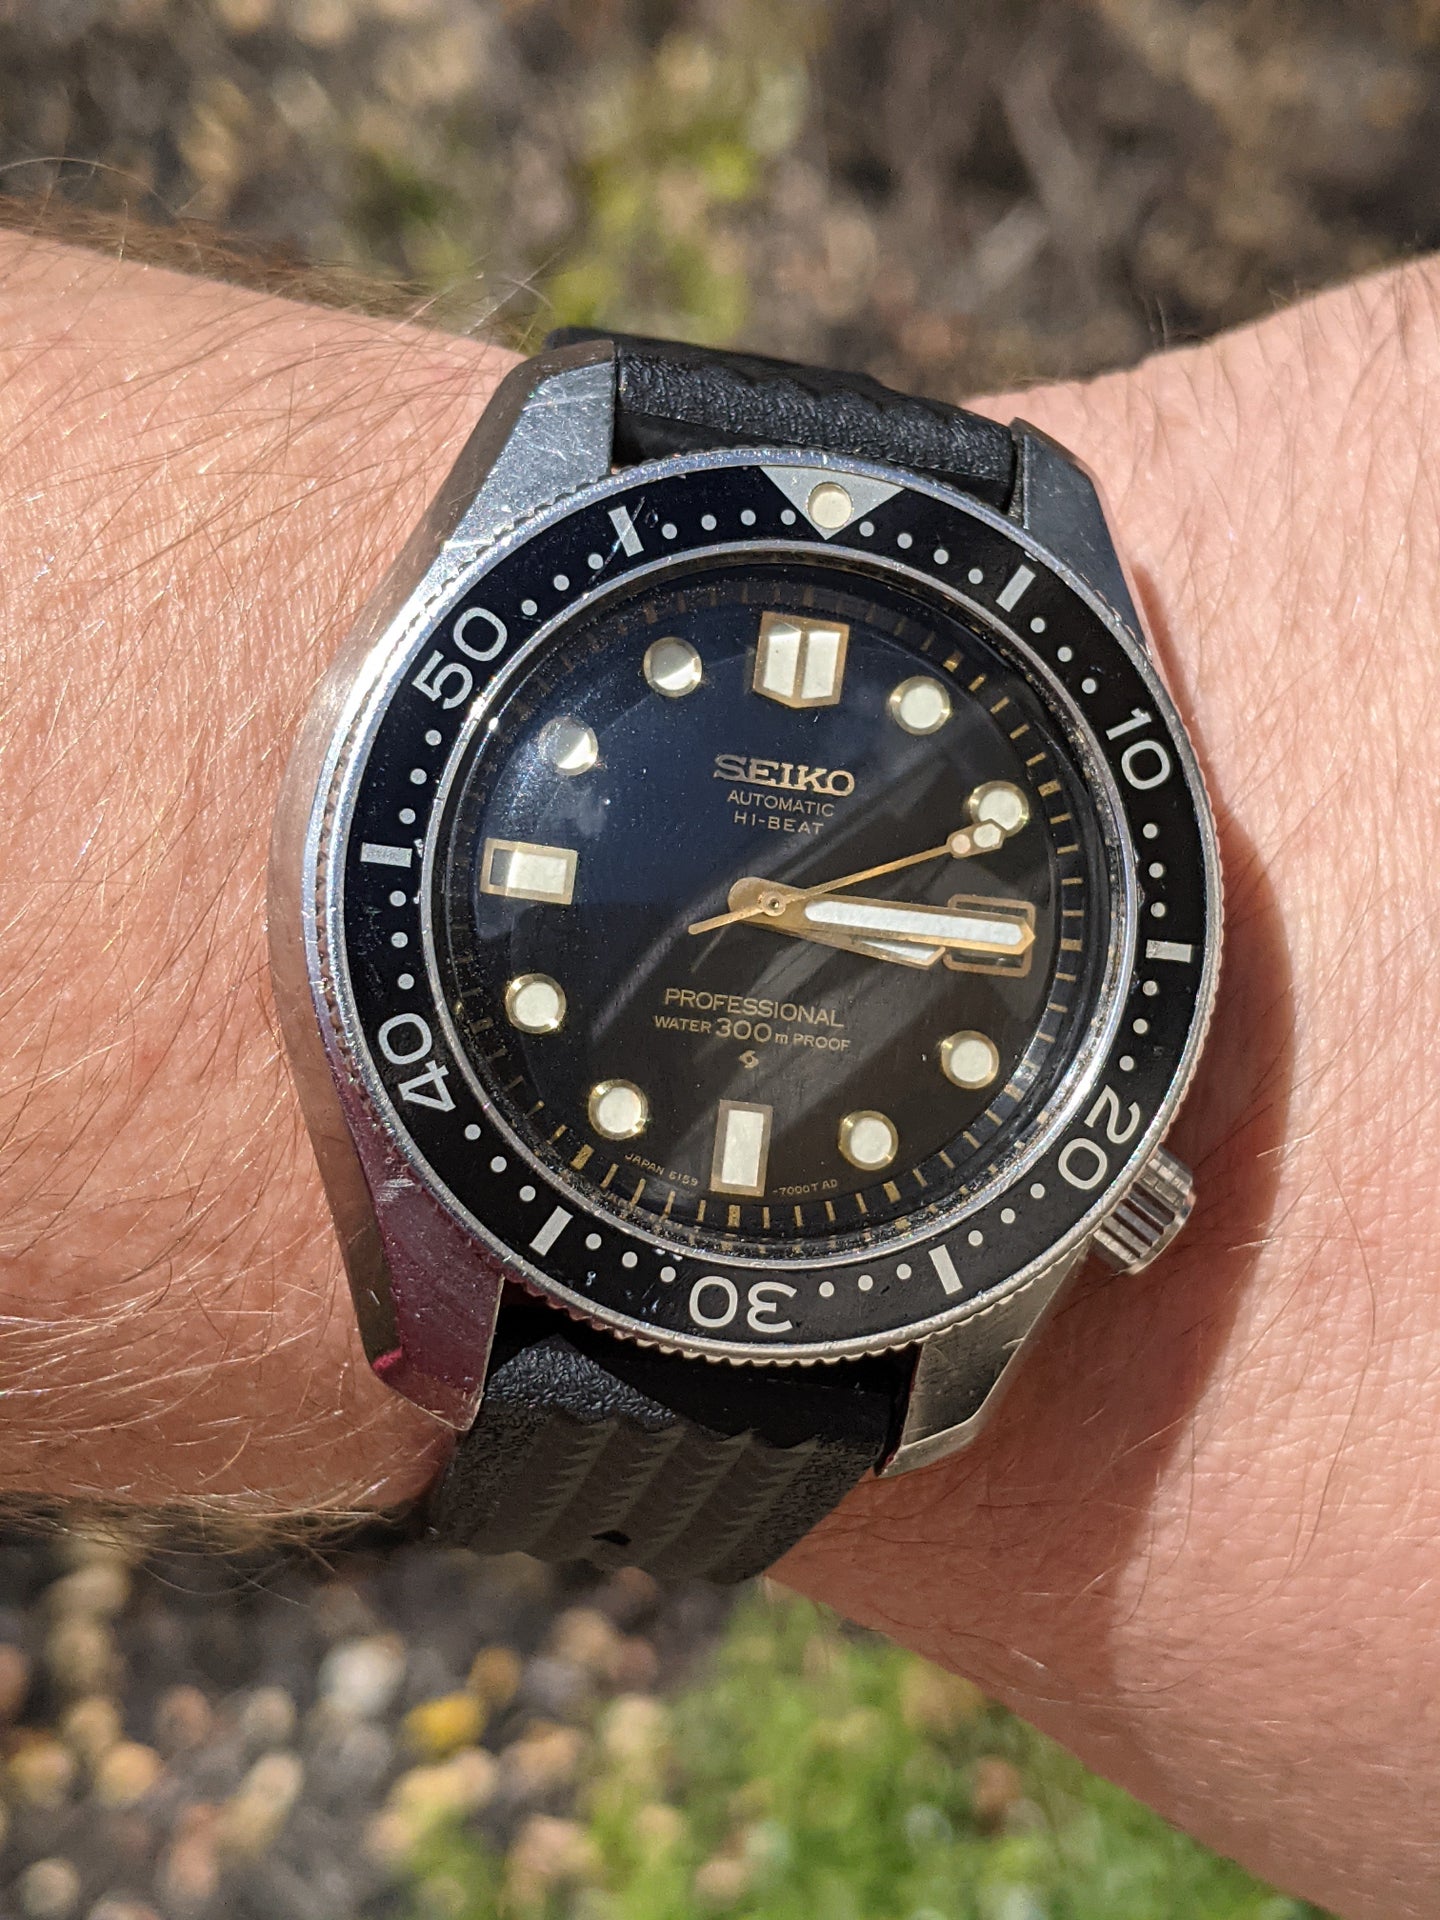 Seiko 6159-7000/1 Owner's Club - Let's see 'em | The Watch Site